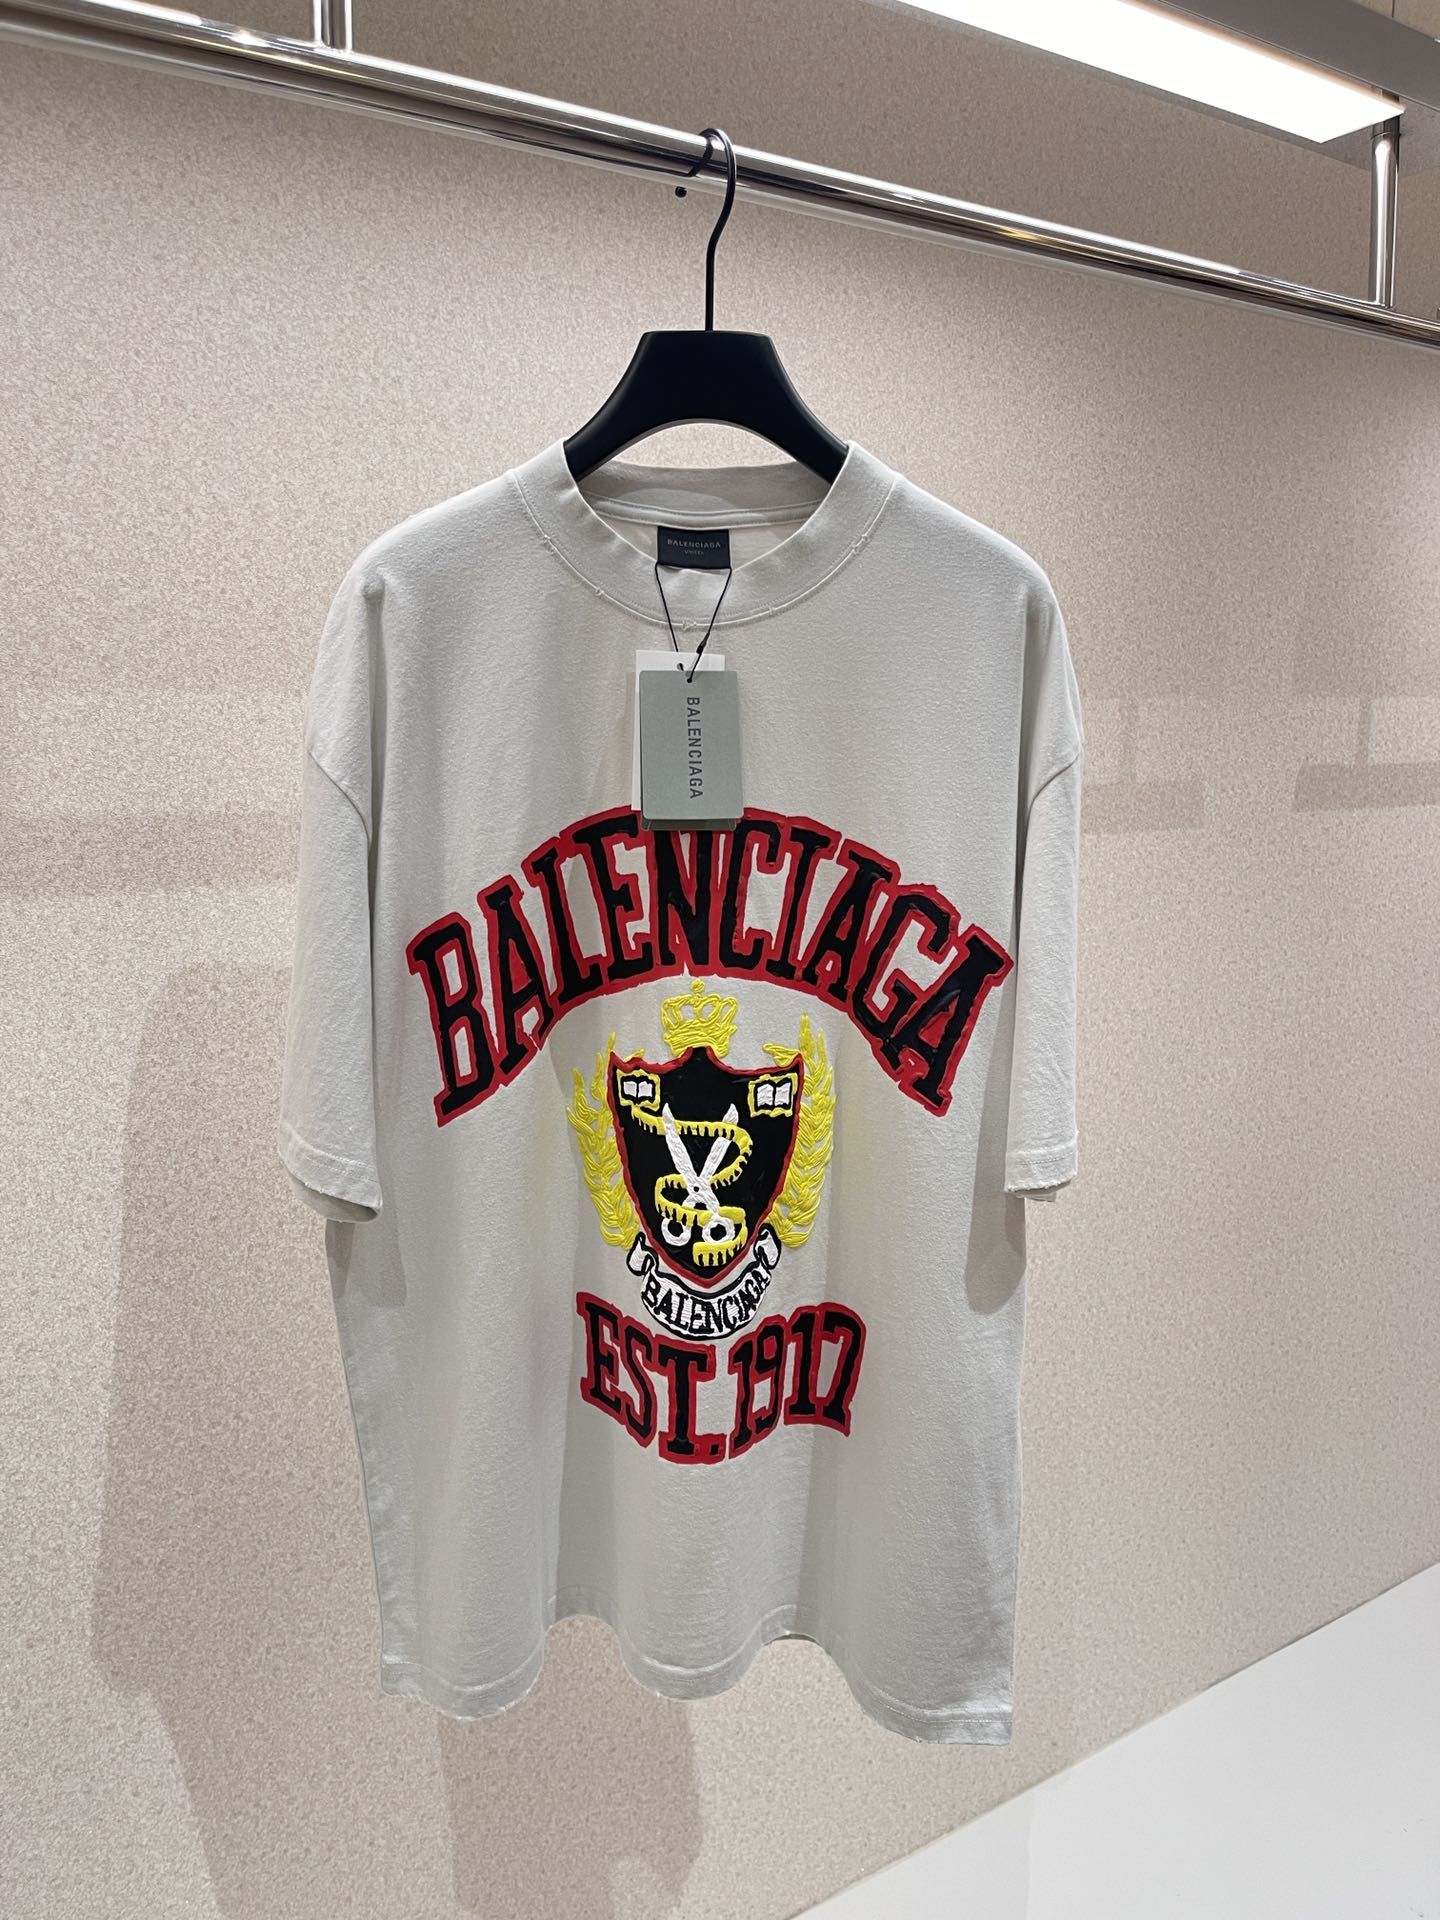 Authentic balenciaga 1917 Series Of Scissors And Short Sleeves With ...